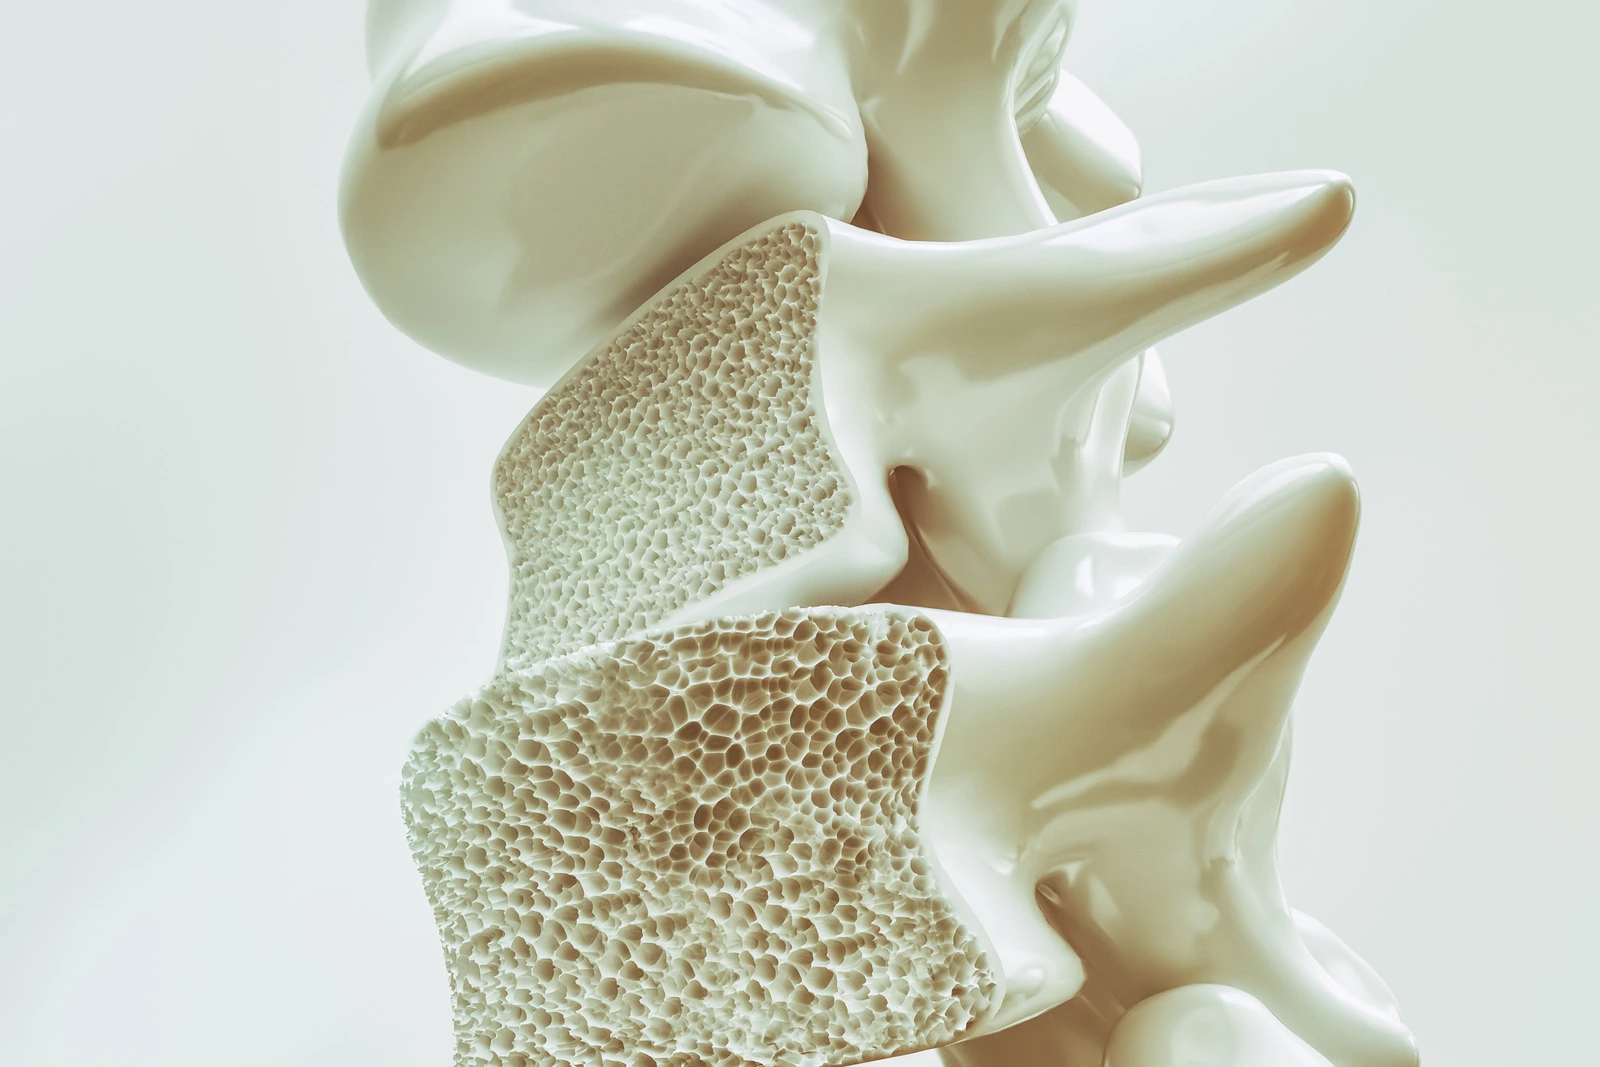 Osteoporosis : What Is It?